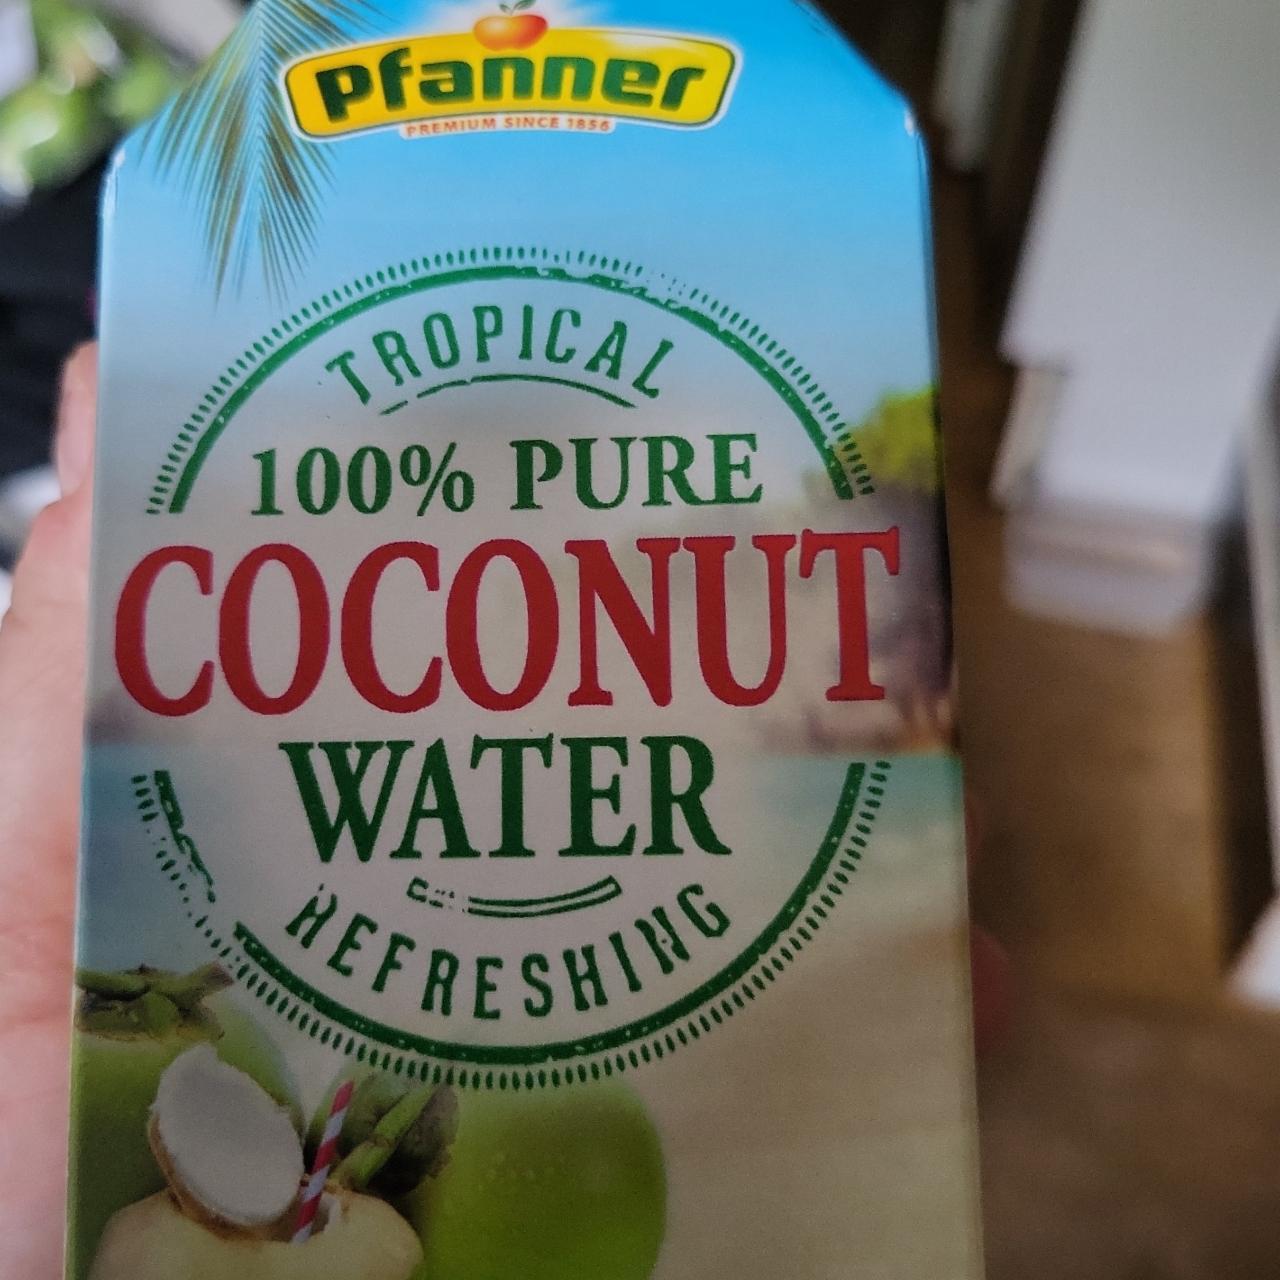 Fotografie - Tropical 100% pure coconut water refreshing Pfanner